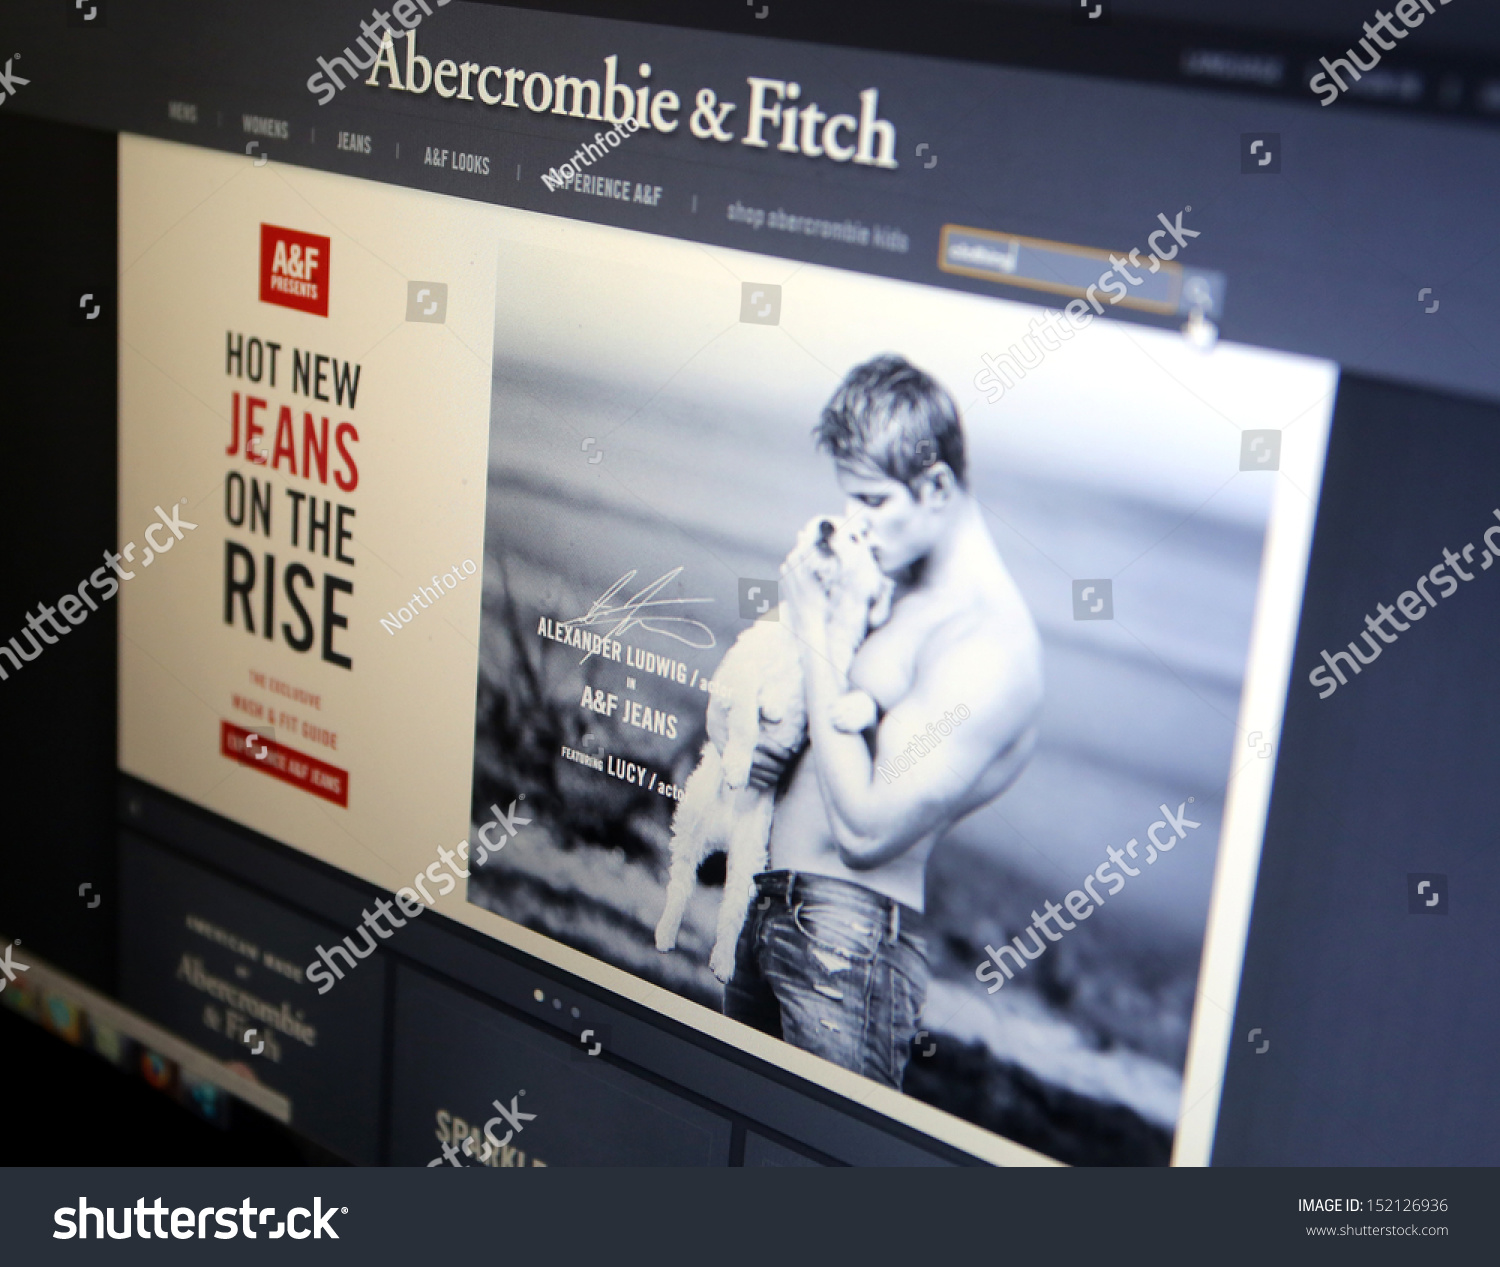 abercrombie and fitch american website